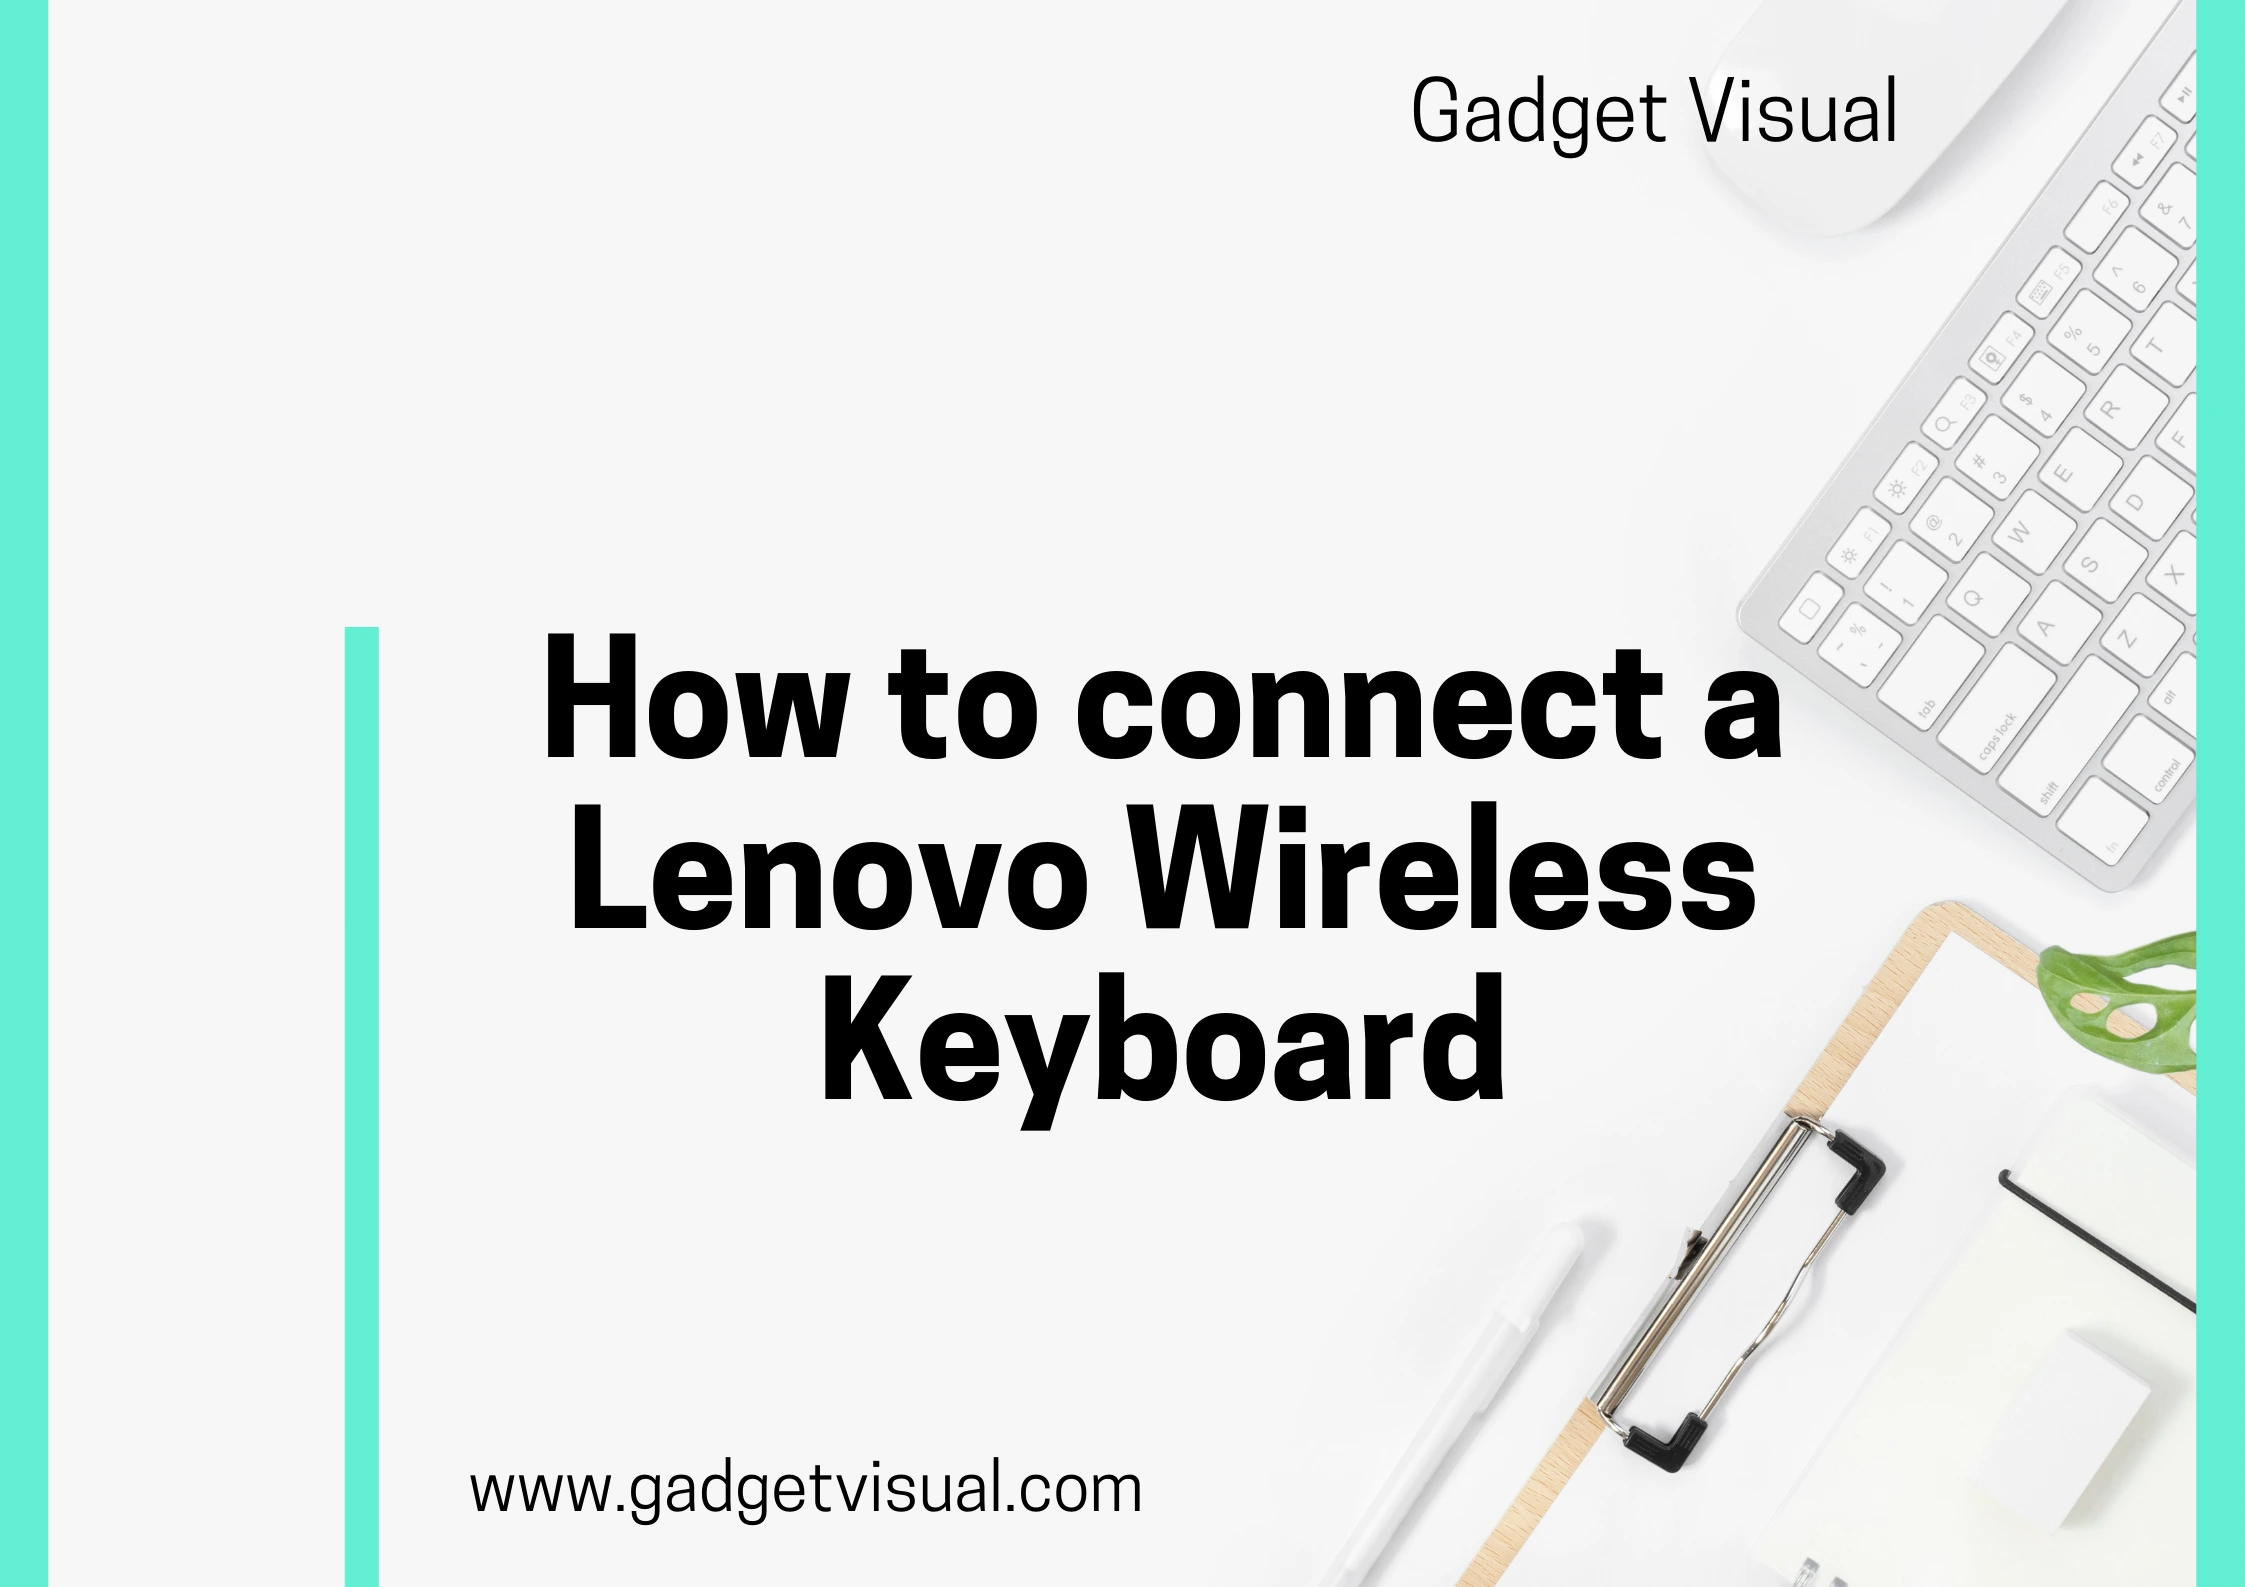 How to connect a Lenovo Wireless Keyboard